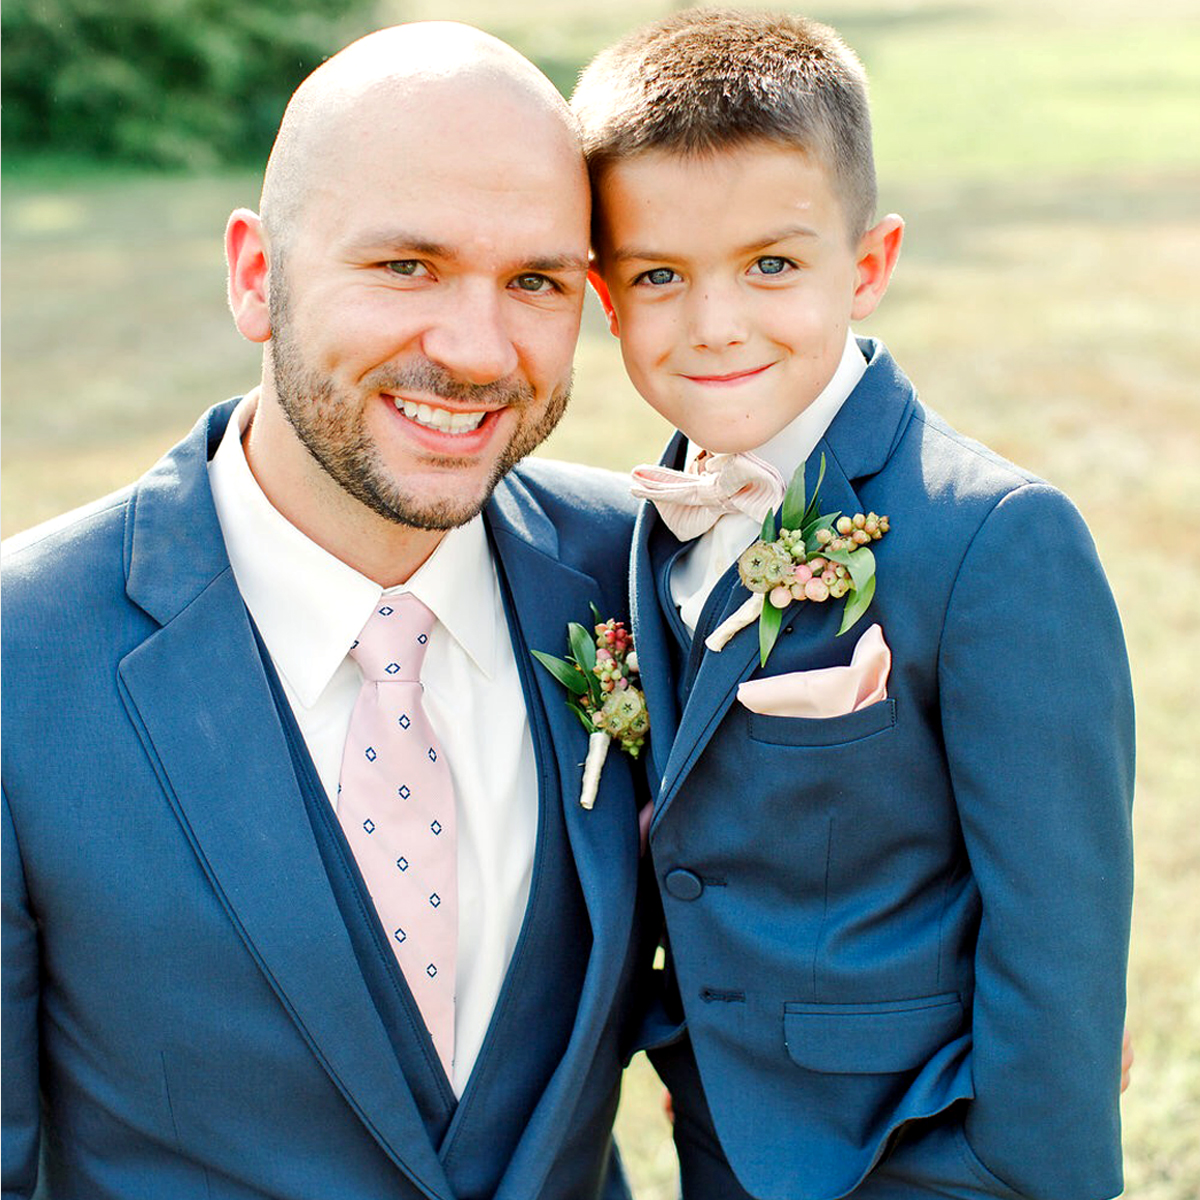 boy and father on wedding day in matching tuxedos